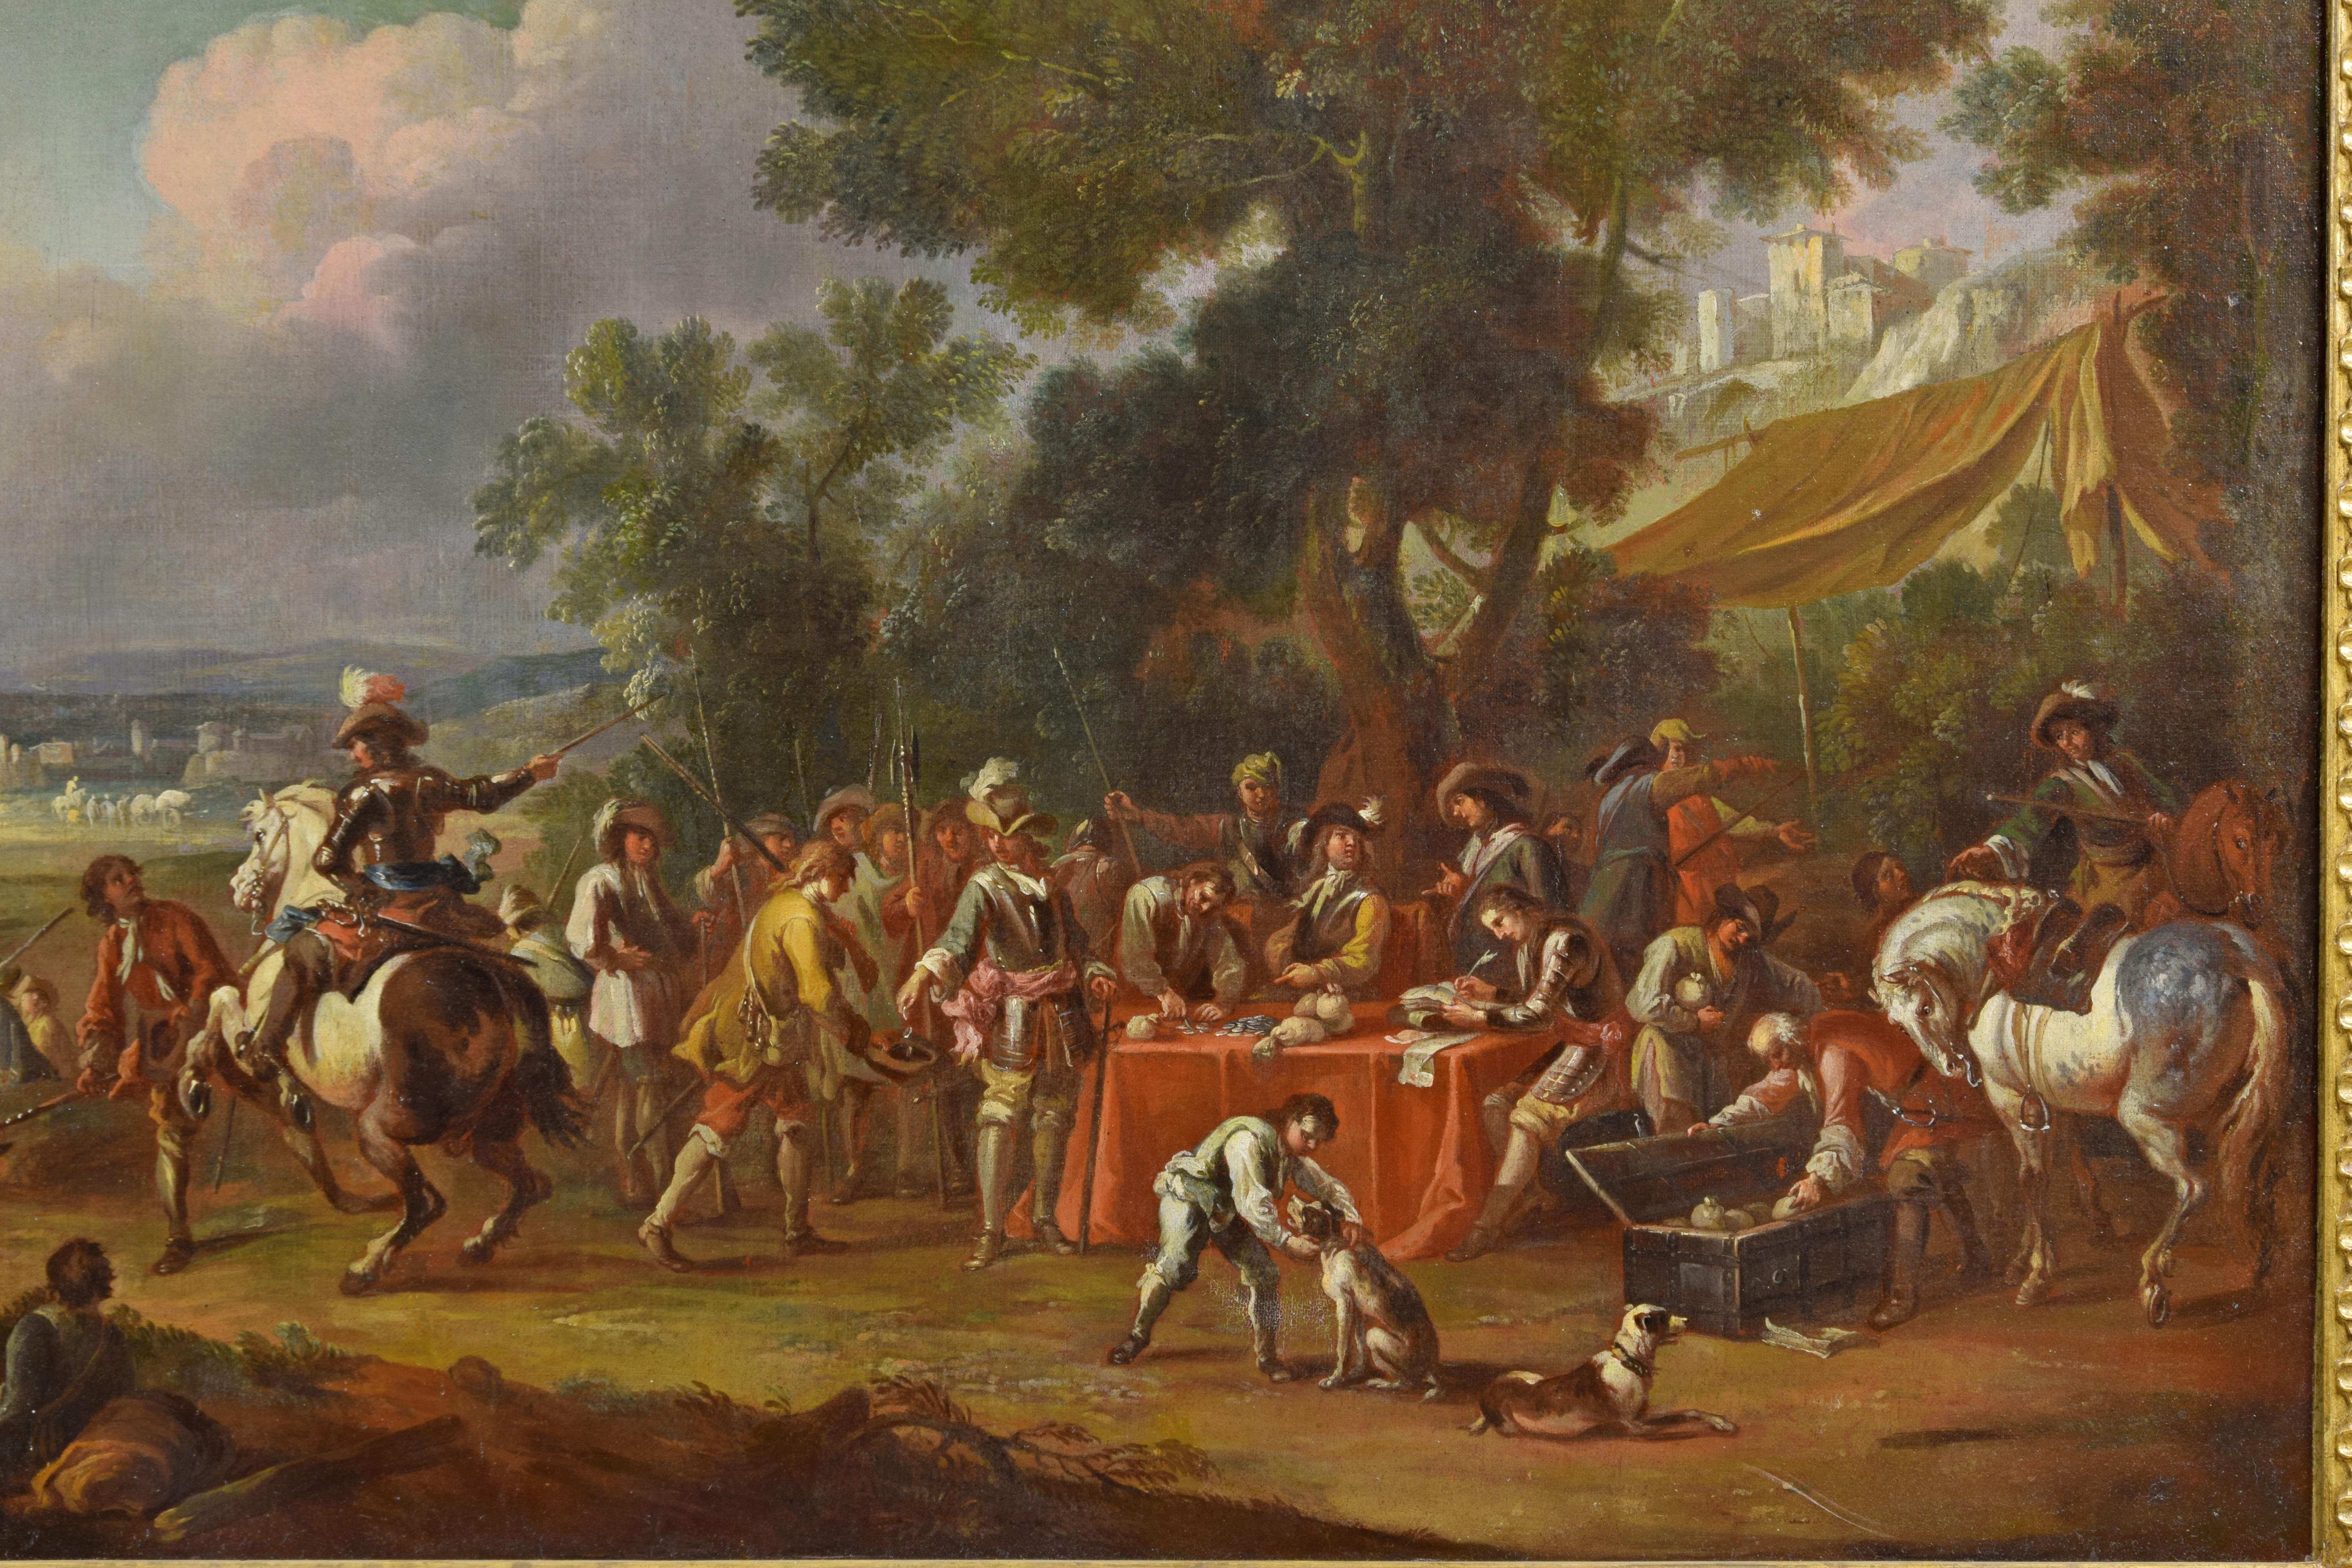 Baroque 17th Century, Dutch Oil on Canvas Painting with the Pay of Soldiers